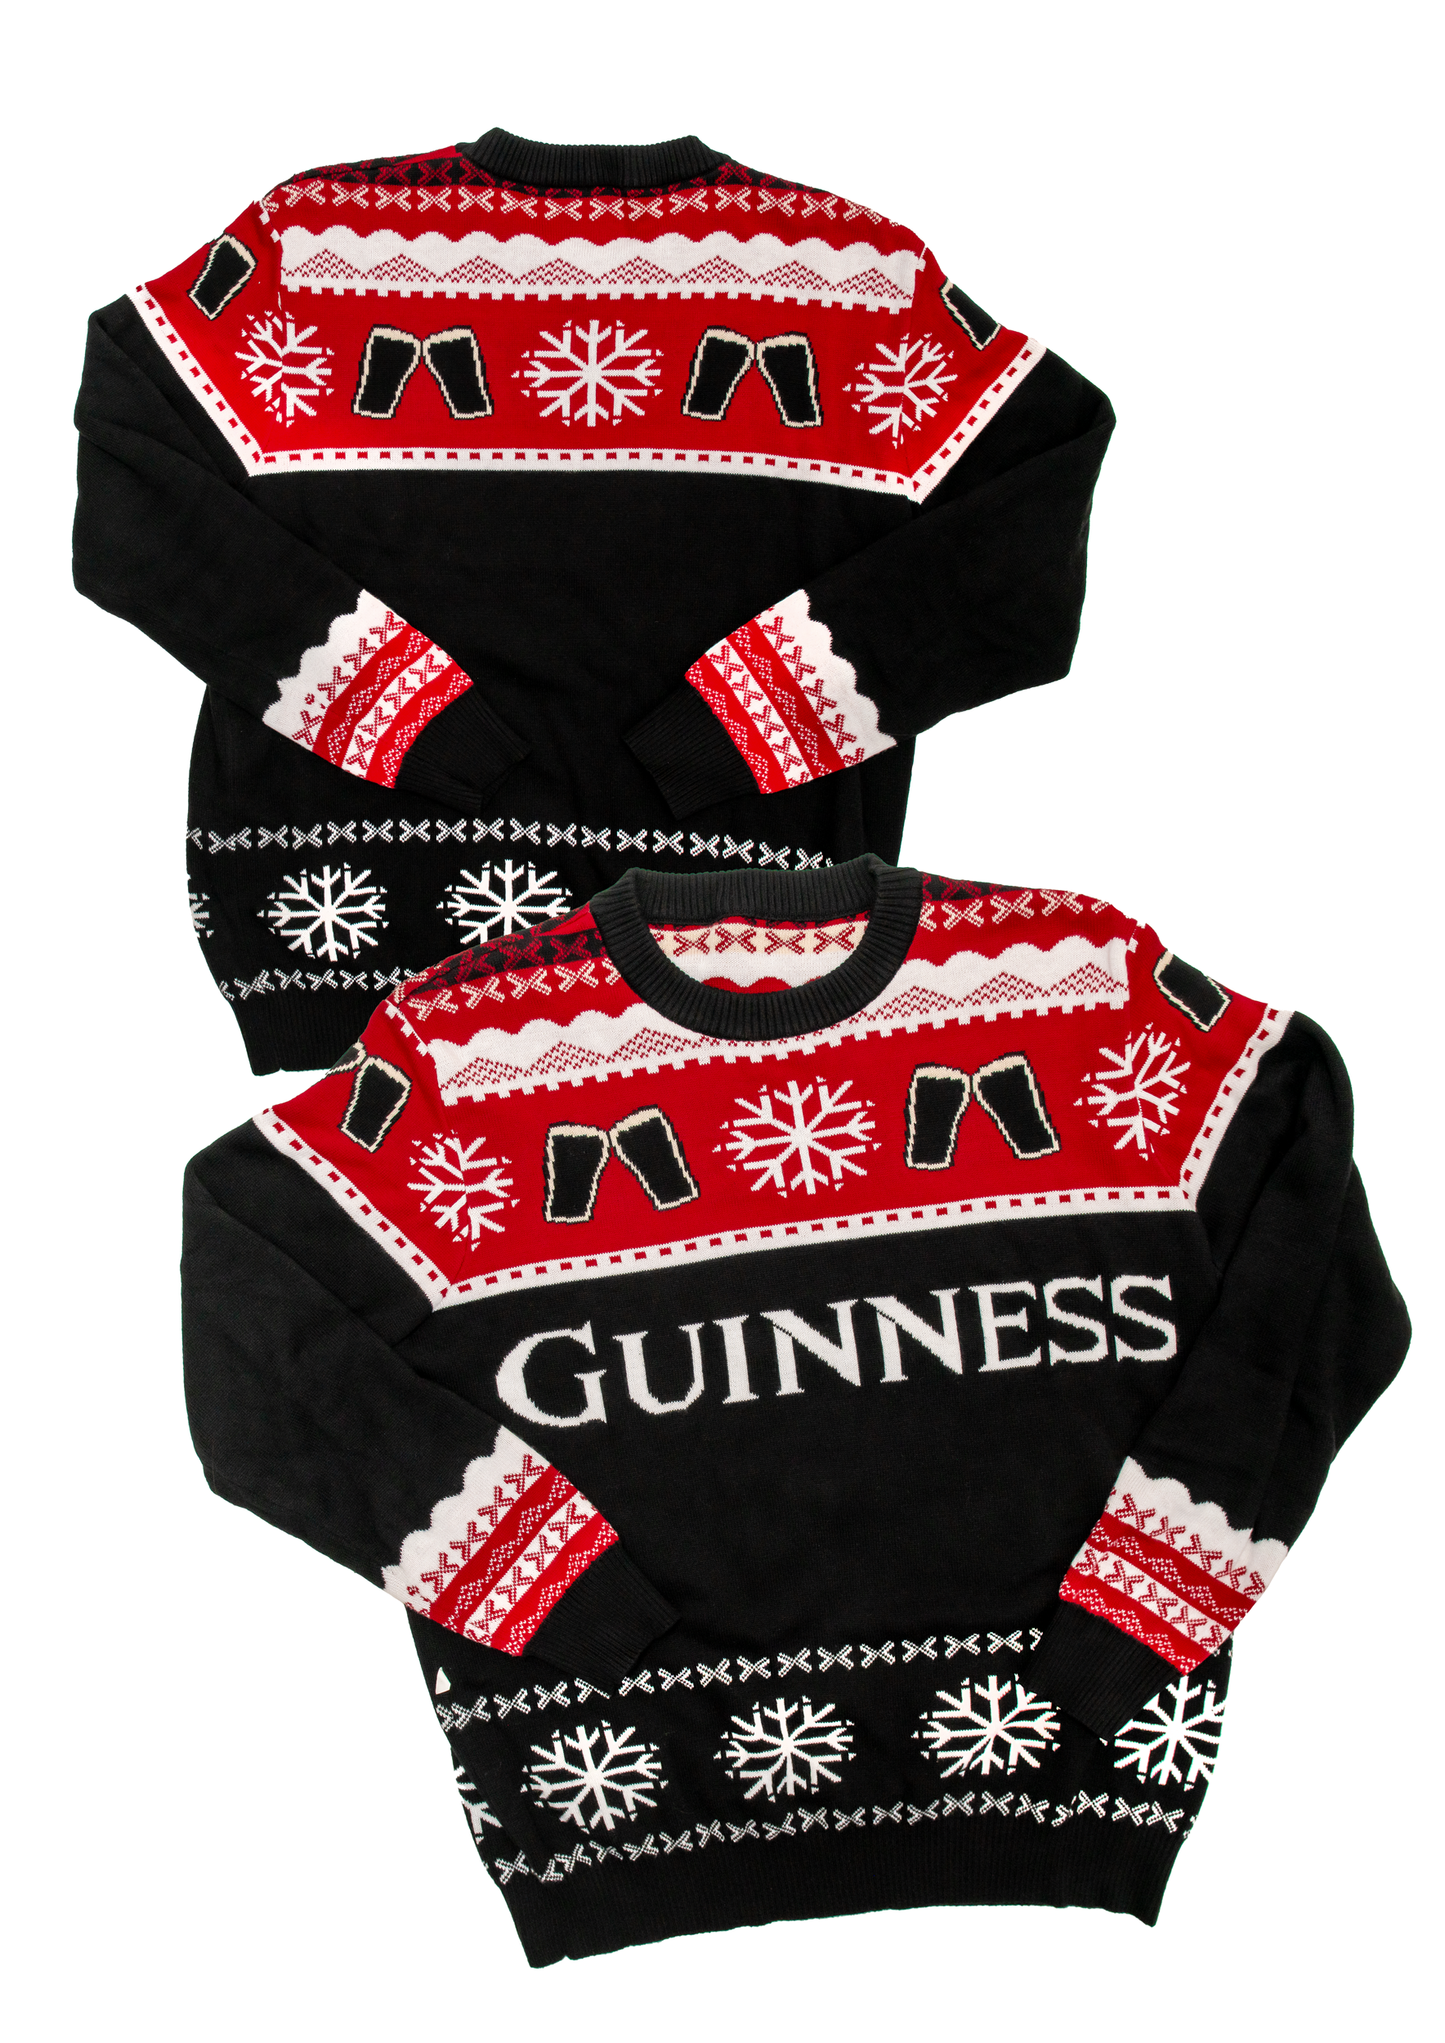 Two festive Official Guinness Christmas jumpers with Guinness UK on them.